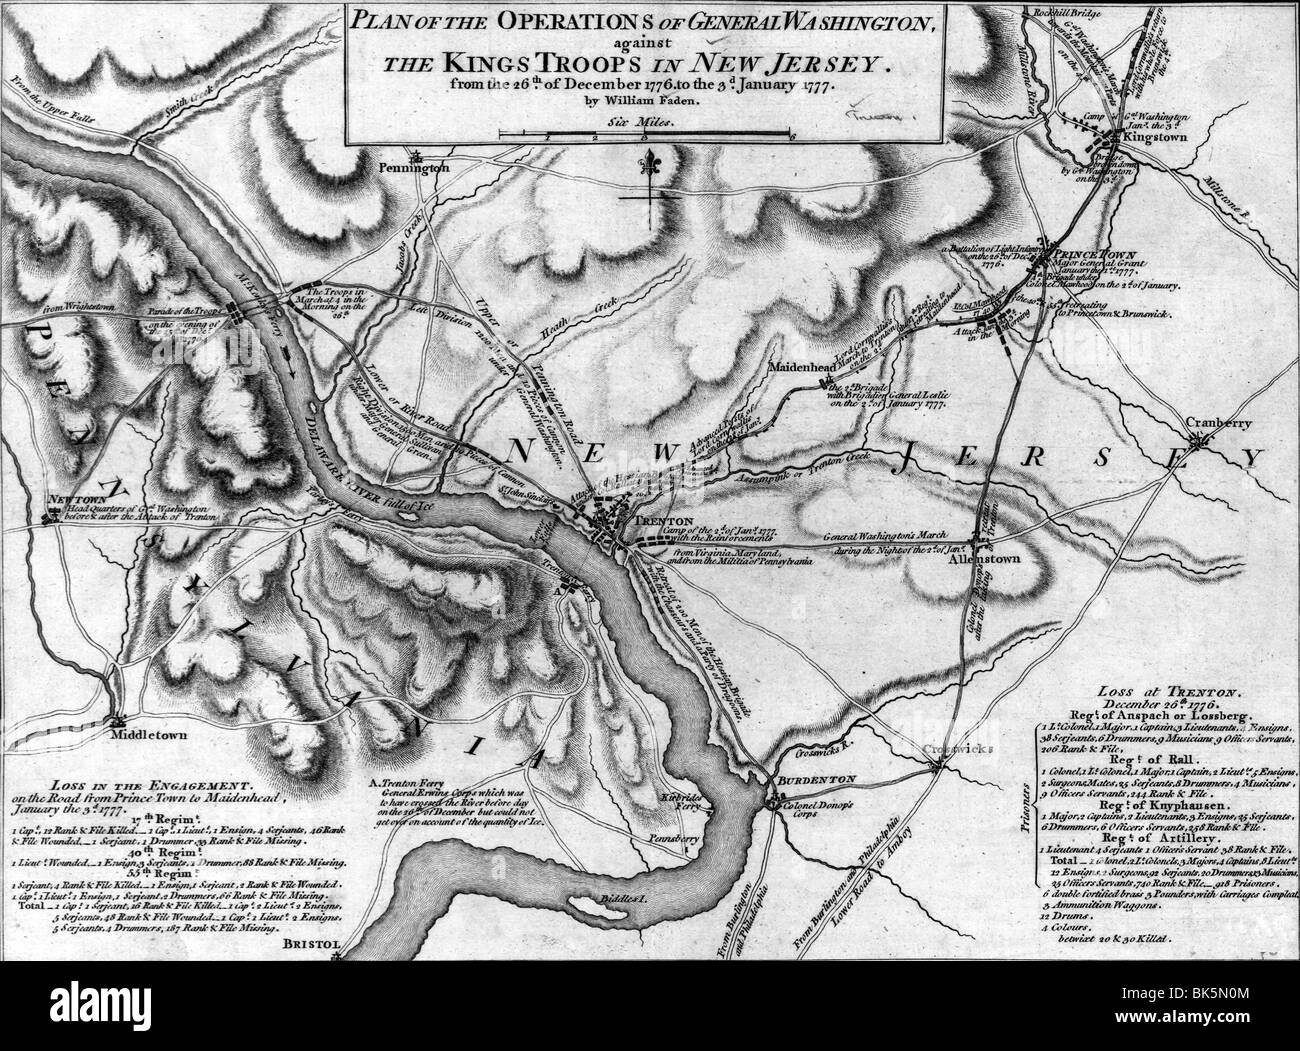 Map of operations of General Washington, against the Kings troops in New Jersey, from the December 26, 1776 to January 3rd, 1777 Stock Photo